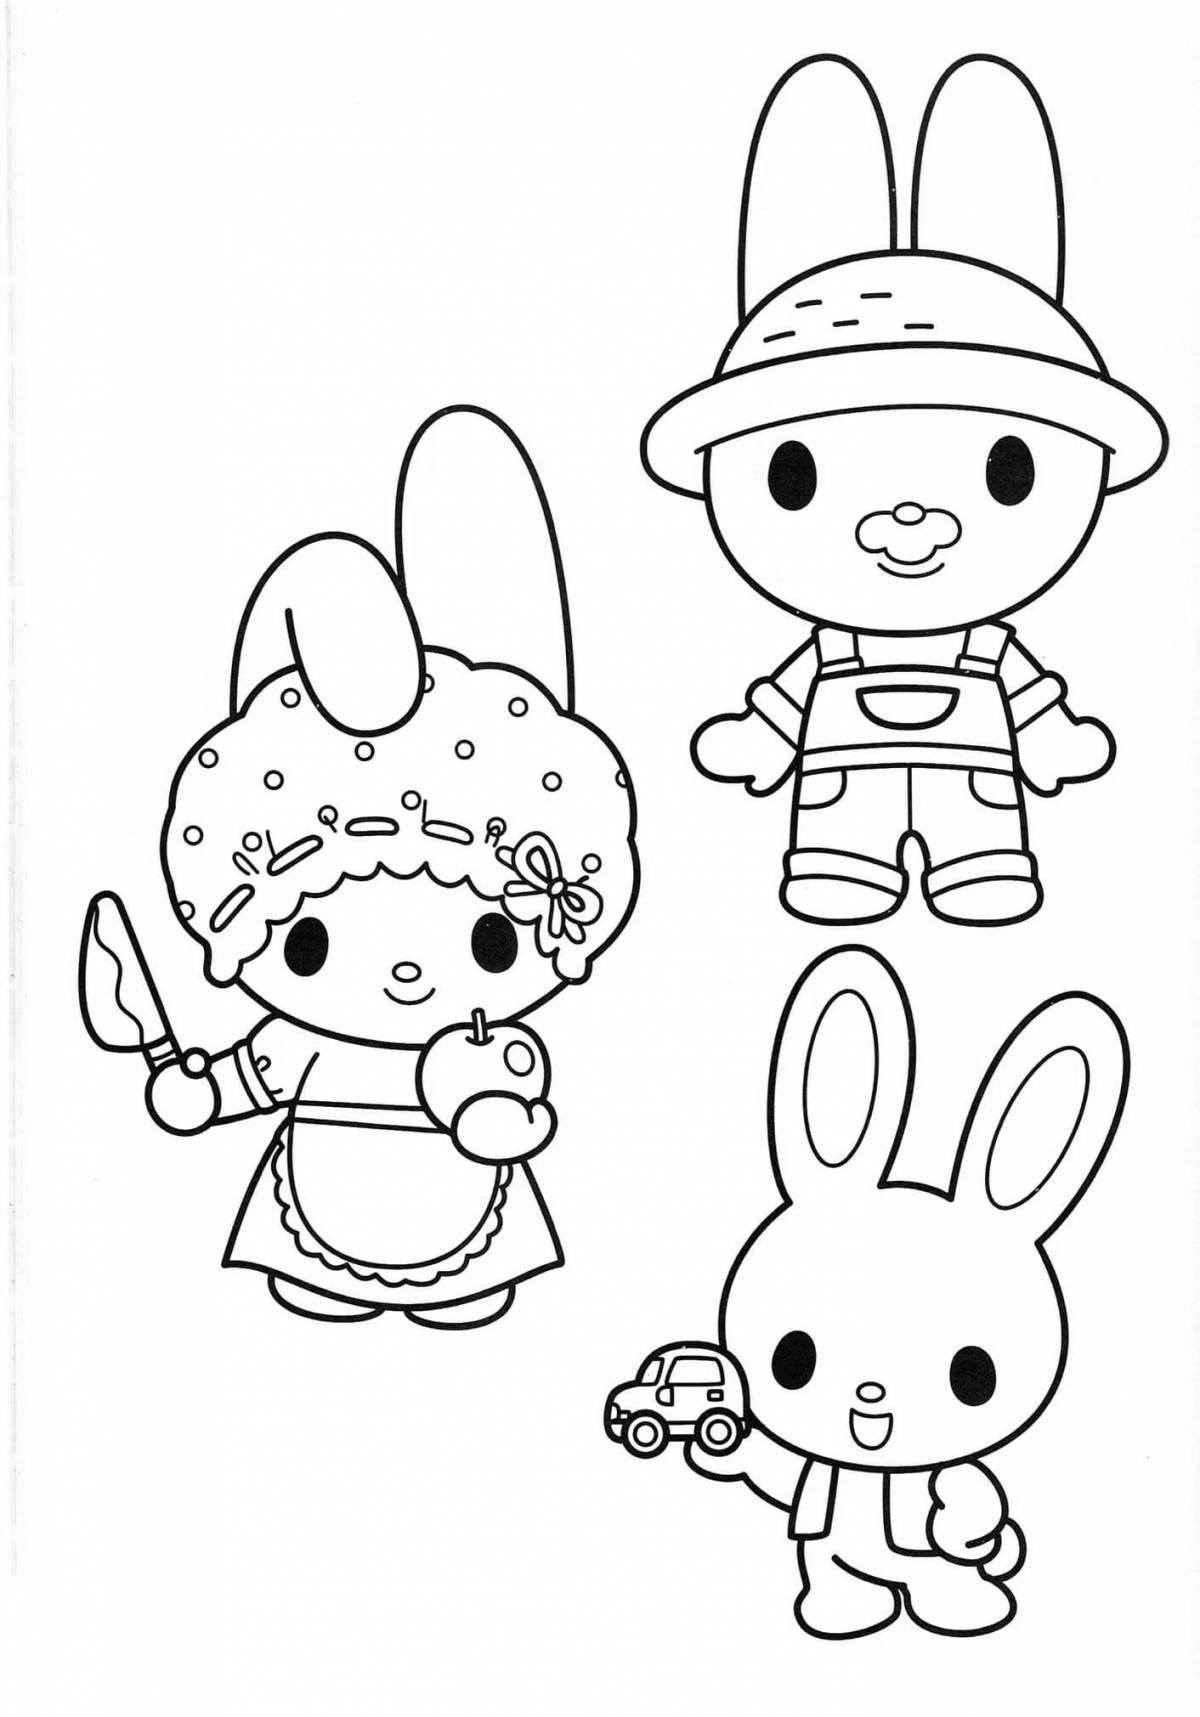 Gorgeous may melody hello kitty coloring page